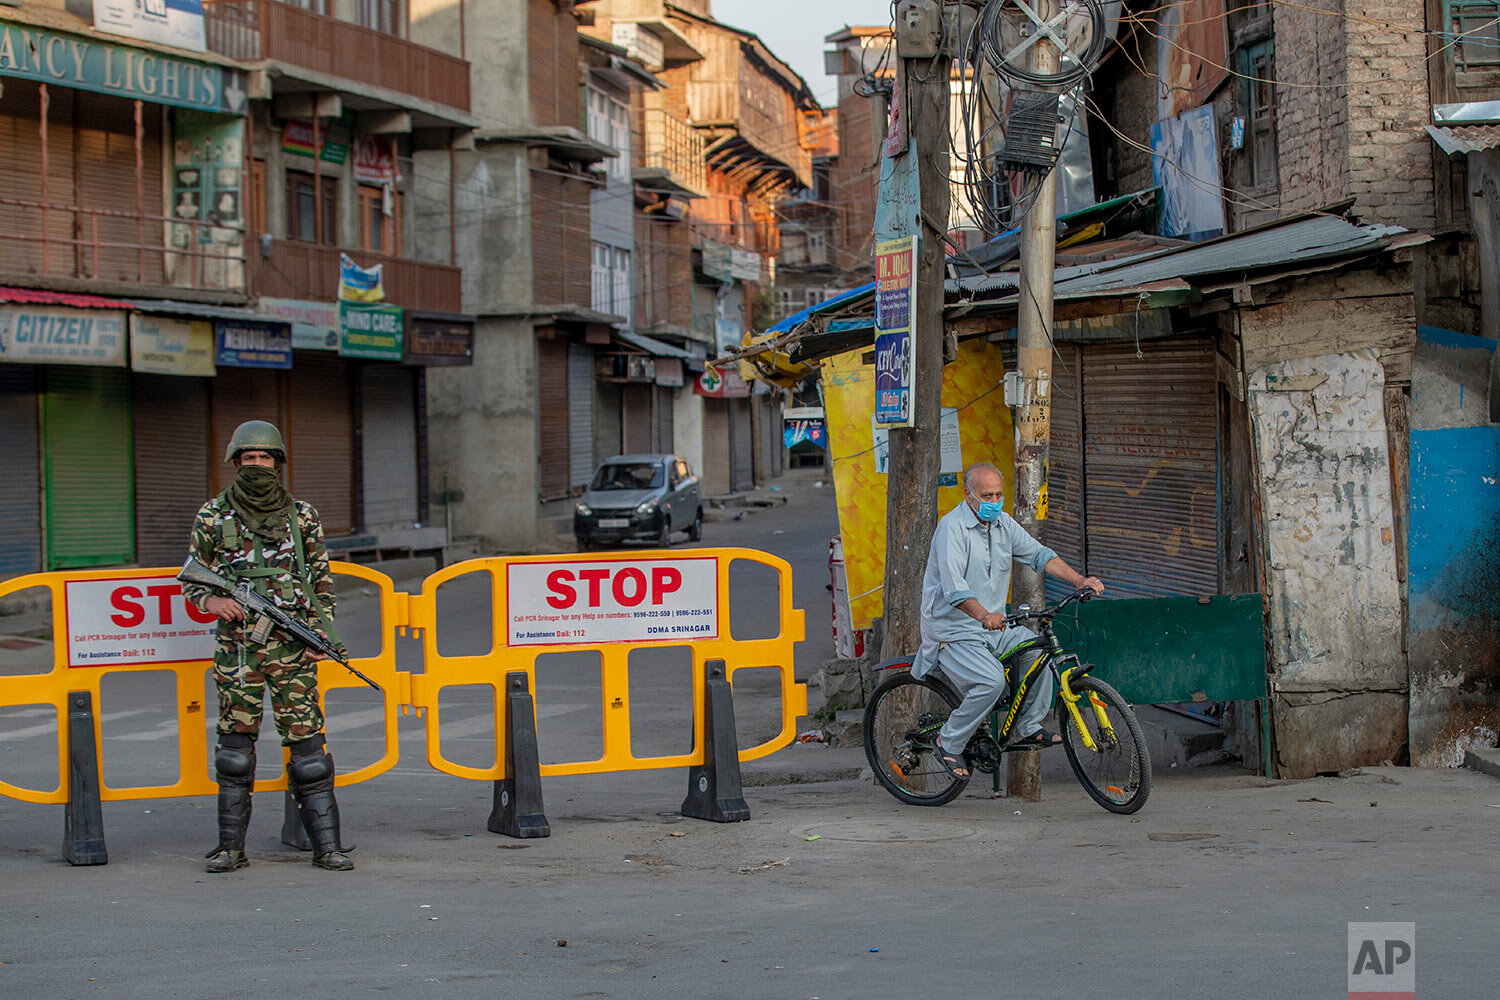  A Kashmiri cycles past a barricade set up as road blockade as a paramilitary soldier stands guard on the first anniversary of India’s decision to revoke the disputed region’s semi-autonomy, in Srinagar, Indian controlled Kashmir, Wednesday, Aug. 5, 